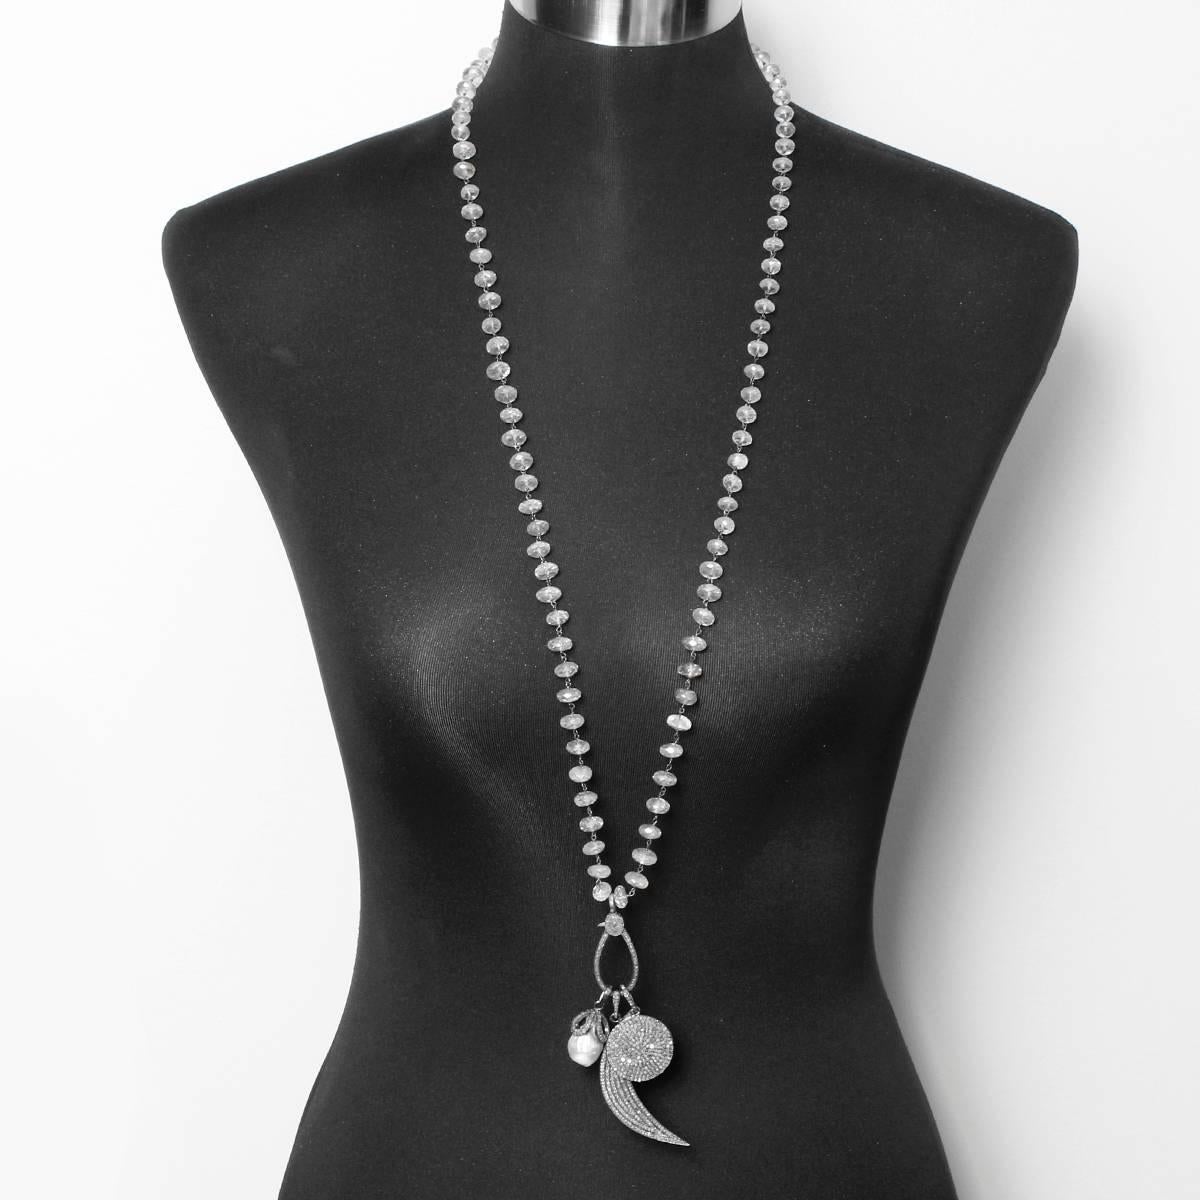 This bohemian inspired necklace features a pearl, moon, and disc pendant with 4.24 ctw. of diamonds set in oxidized silver on a clasp with a clear quartz chain. Pendant and clasp measures apx. 4-1/4 inches in length at the longest point. Chain